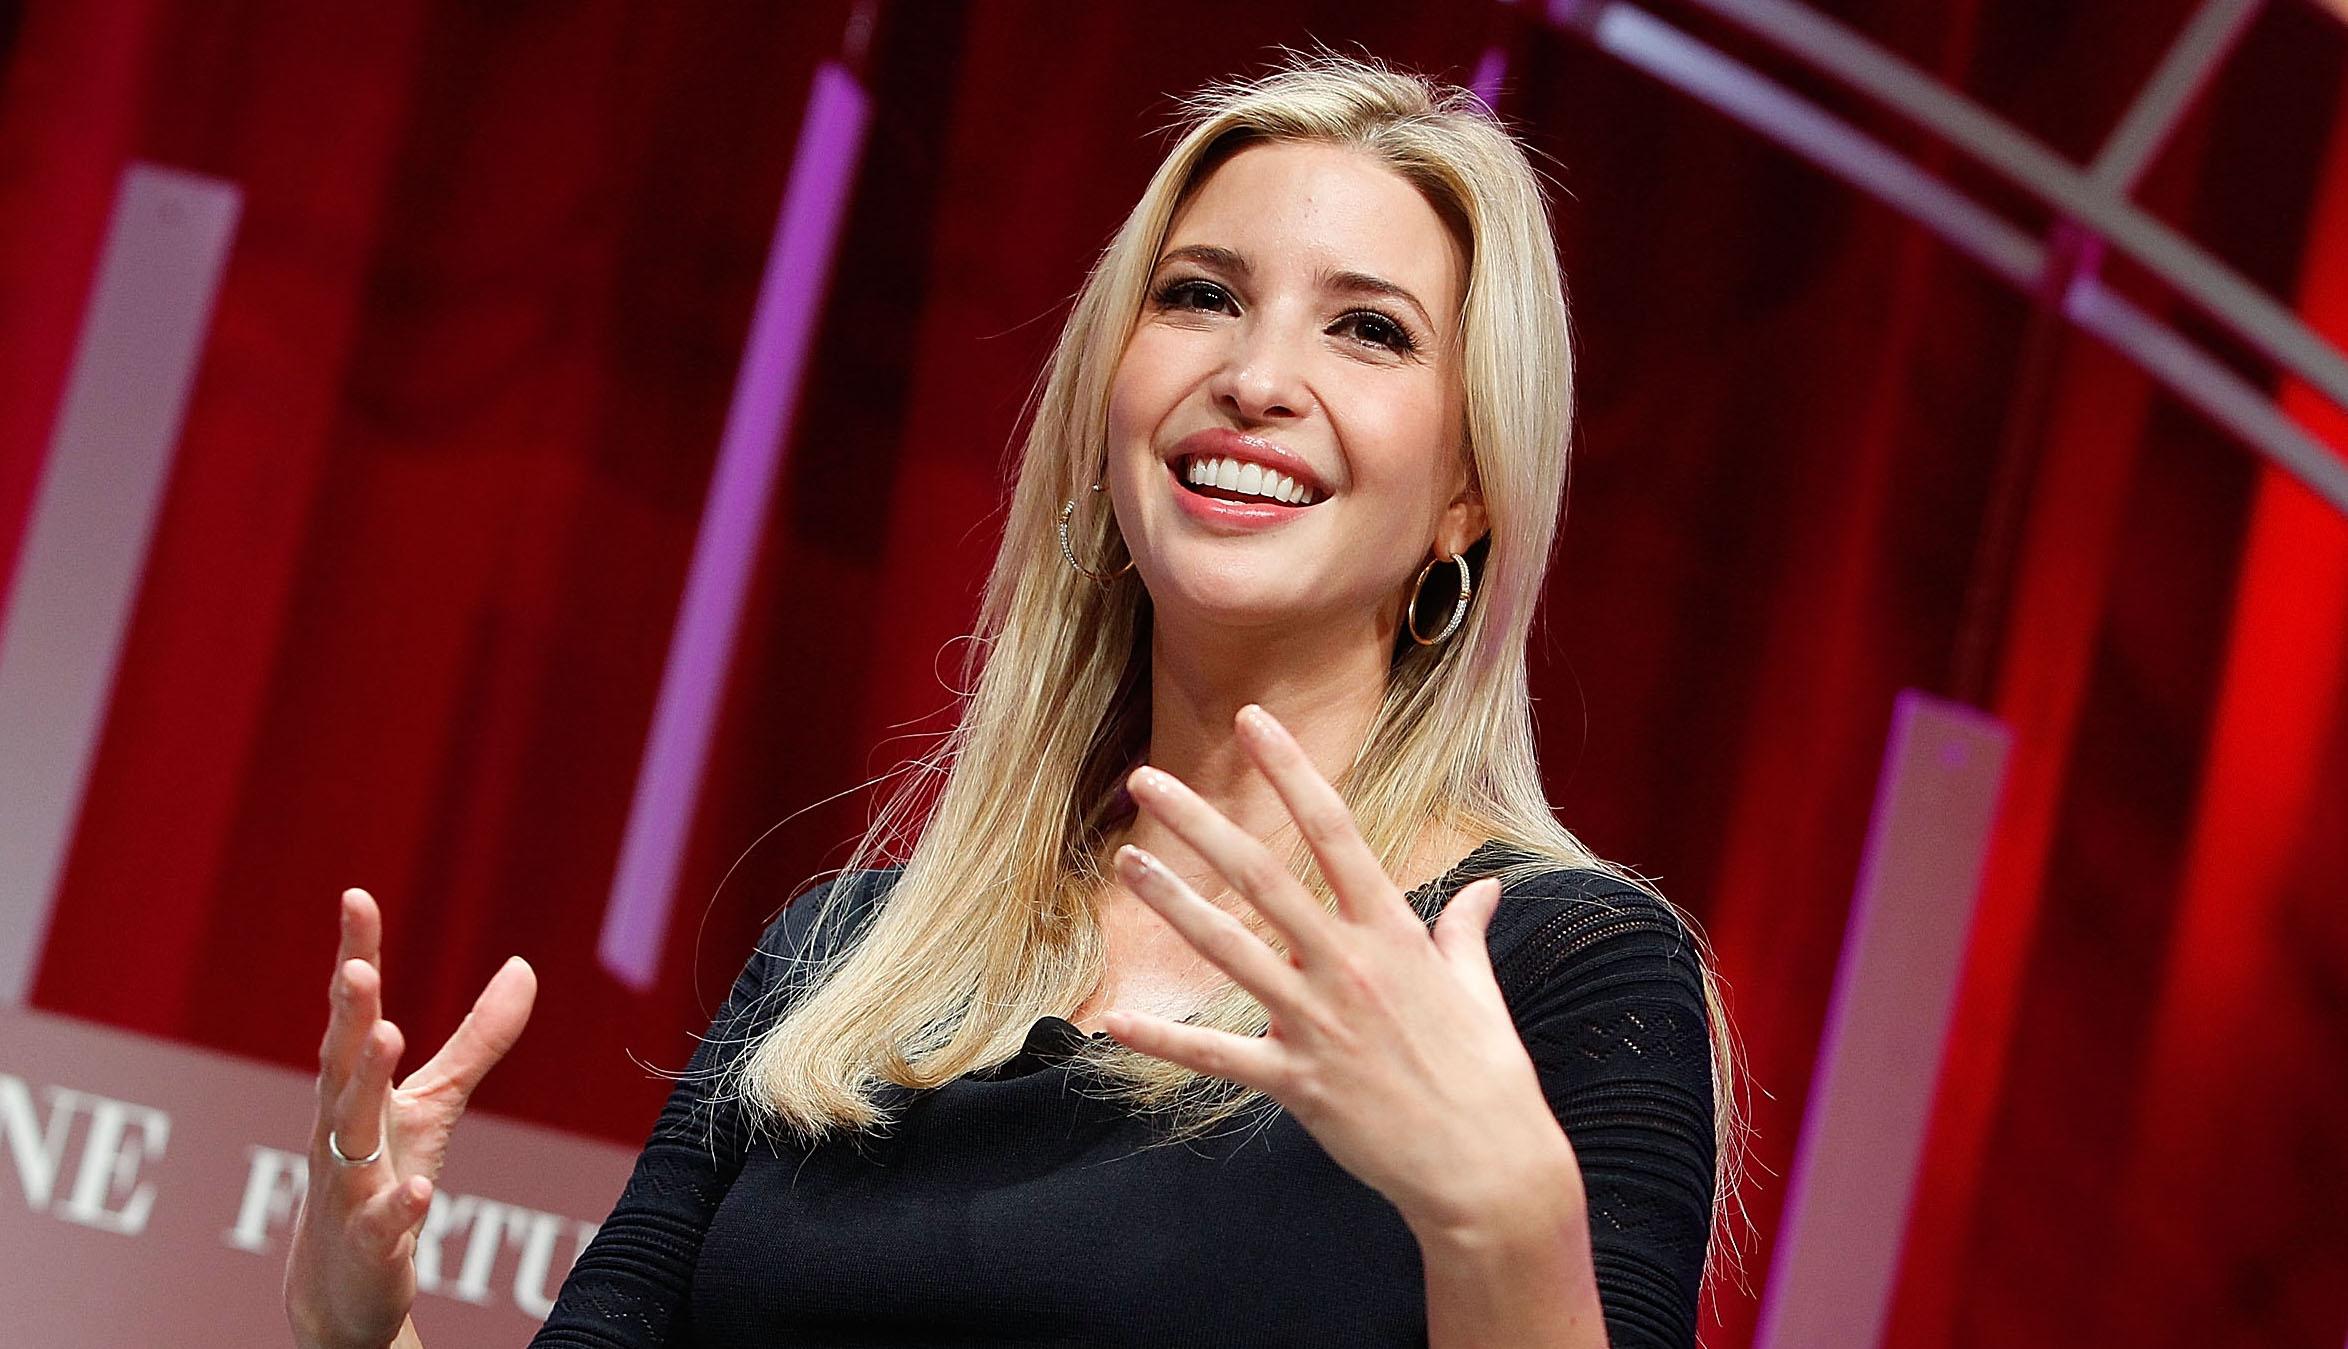 Ivanka Trump speaks onstage during Fortune's Most Powerful Women Summit on October 14, 2015 in Washington, DC.